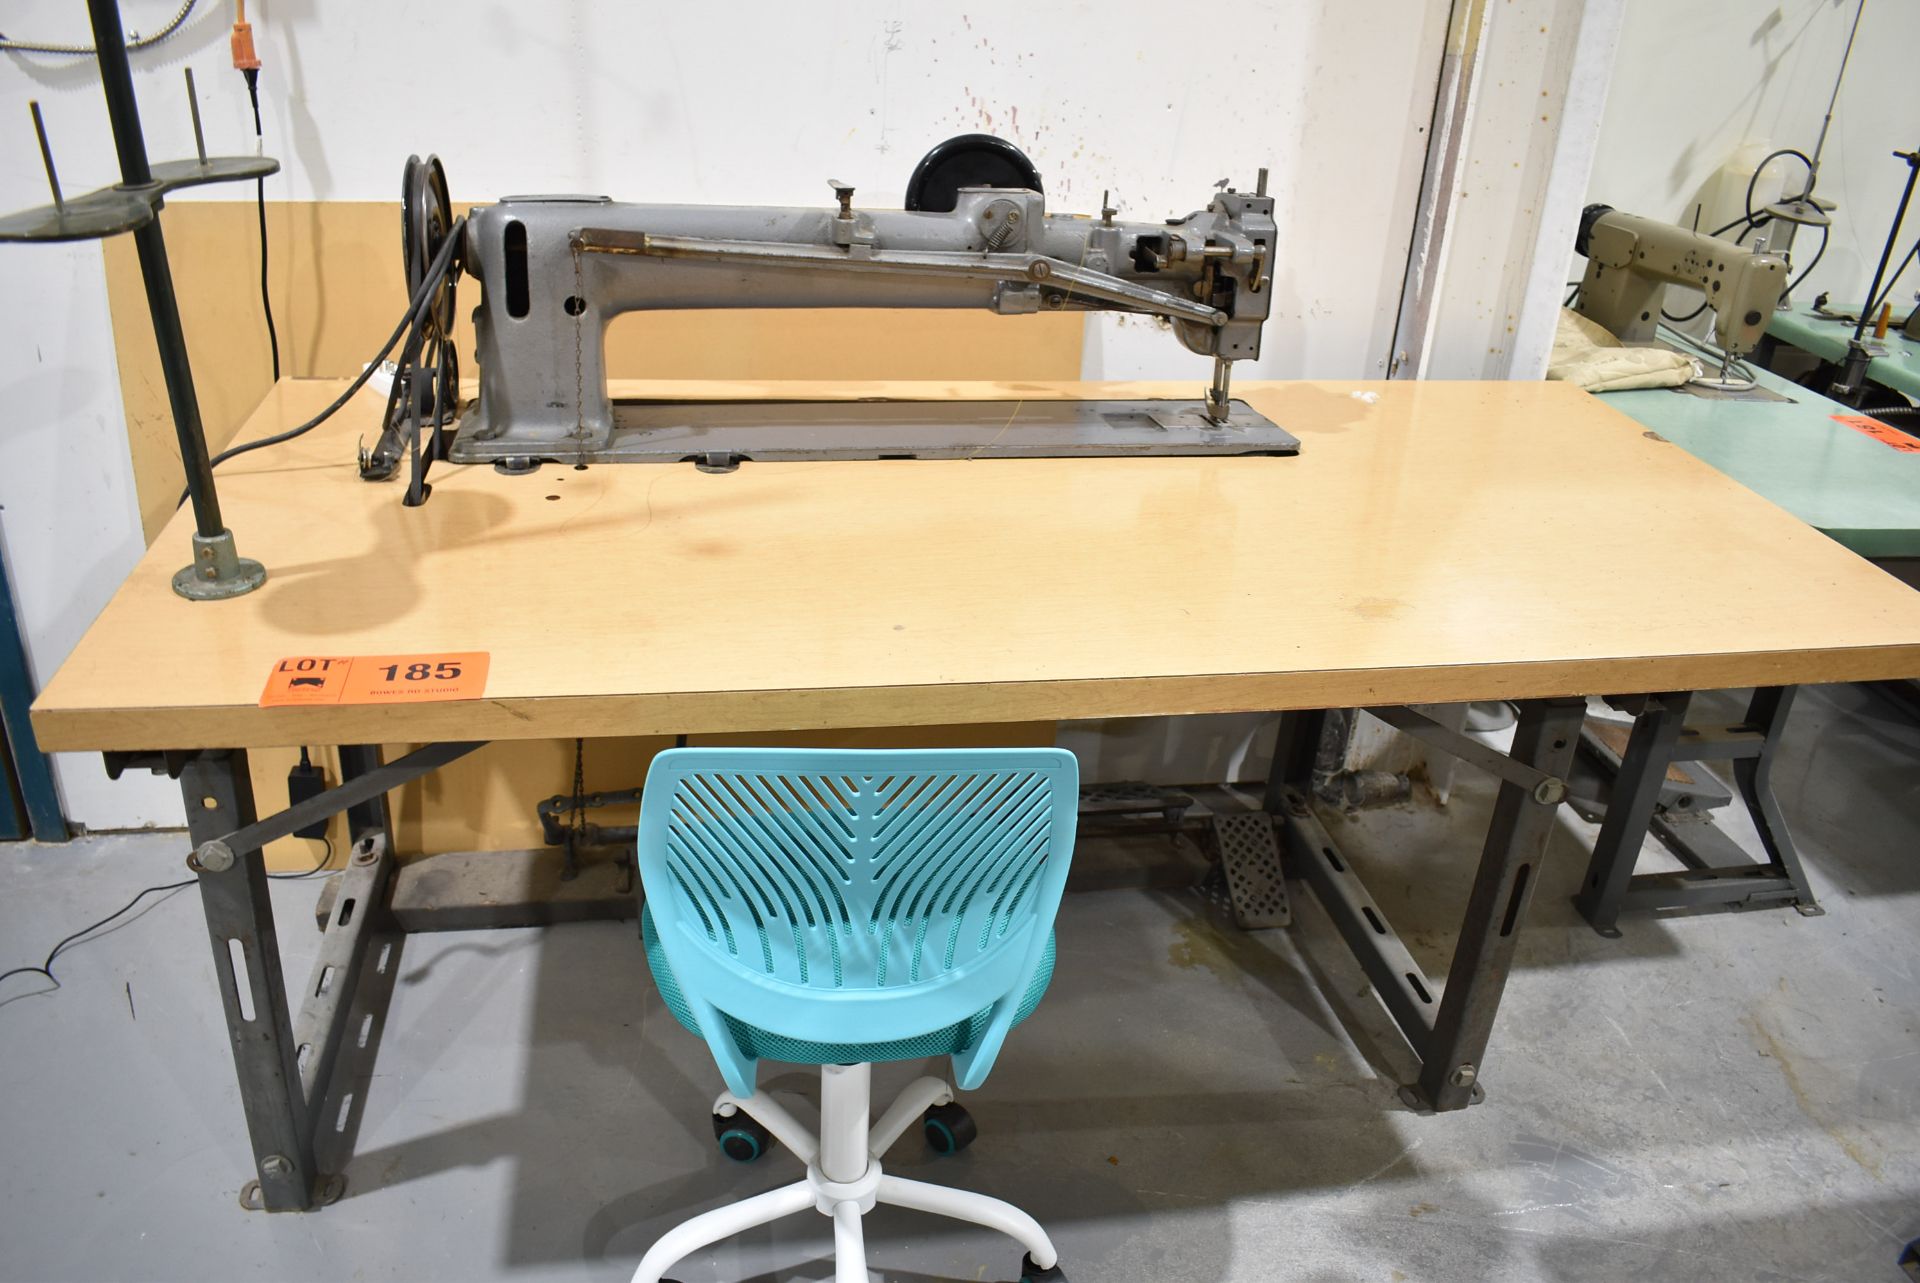 SINGER I44W305 SEWING MACHINE WITH TABLE, S/N N/A [RIGGING FEES FOR LOT #185 - $75 CAD PLUS